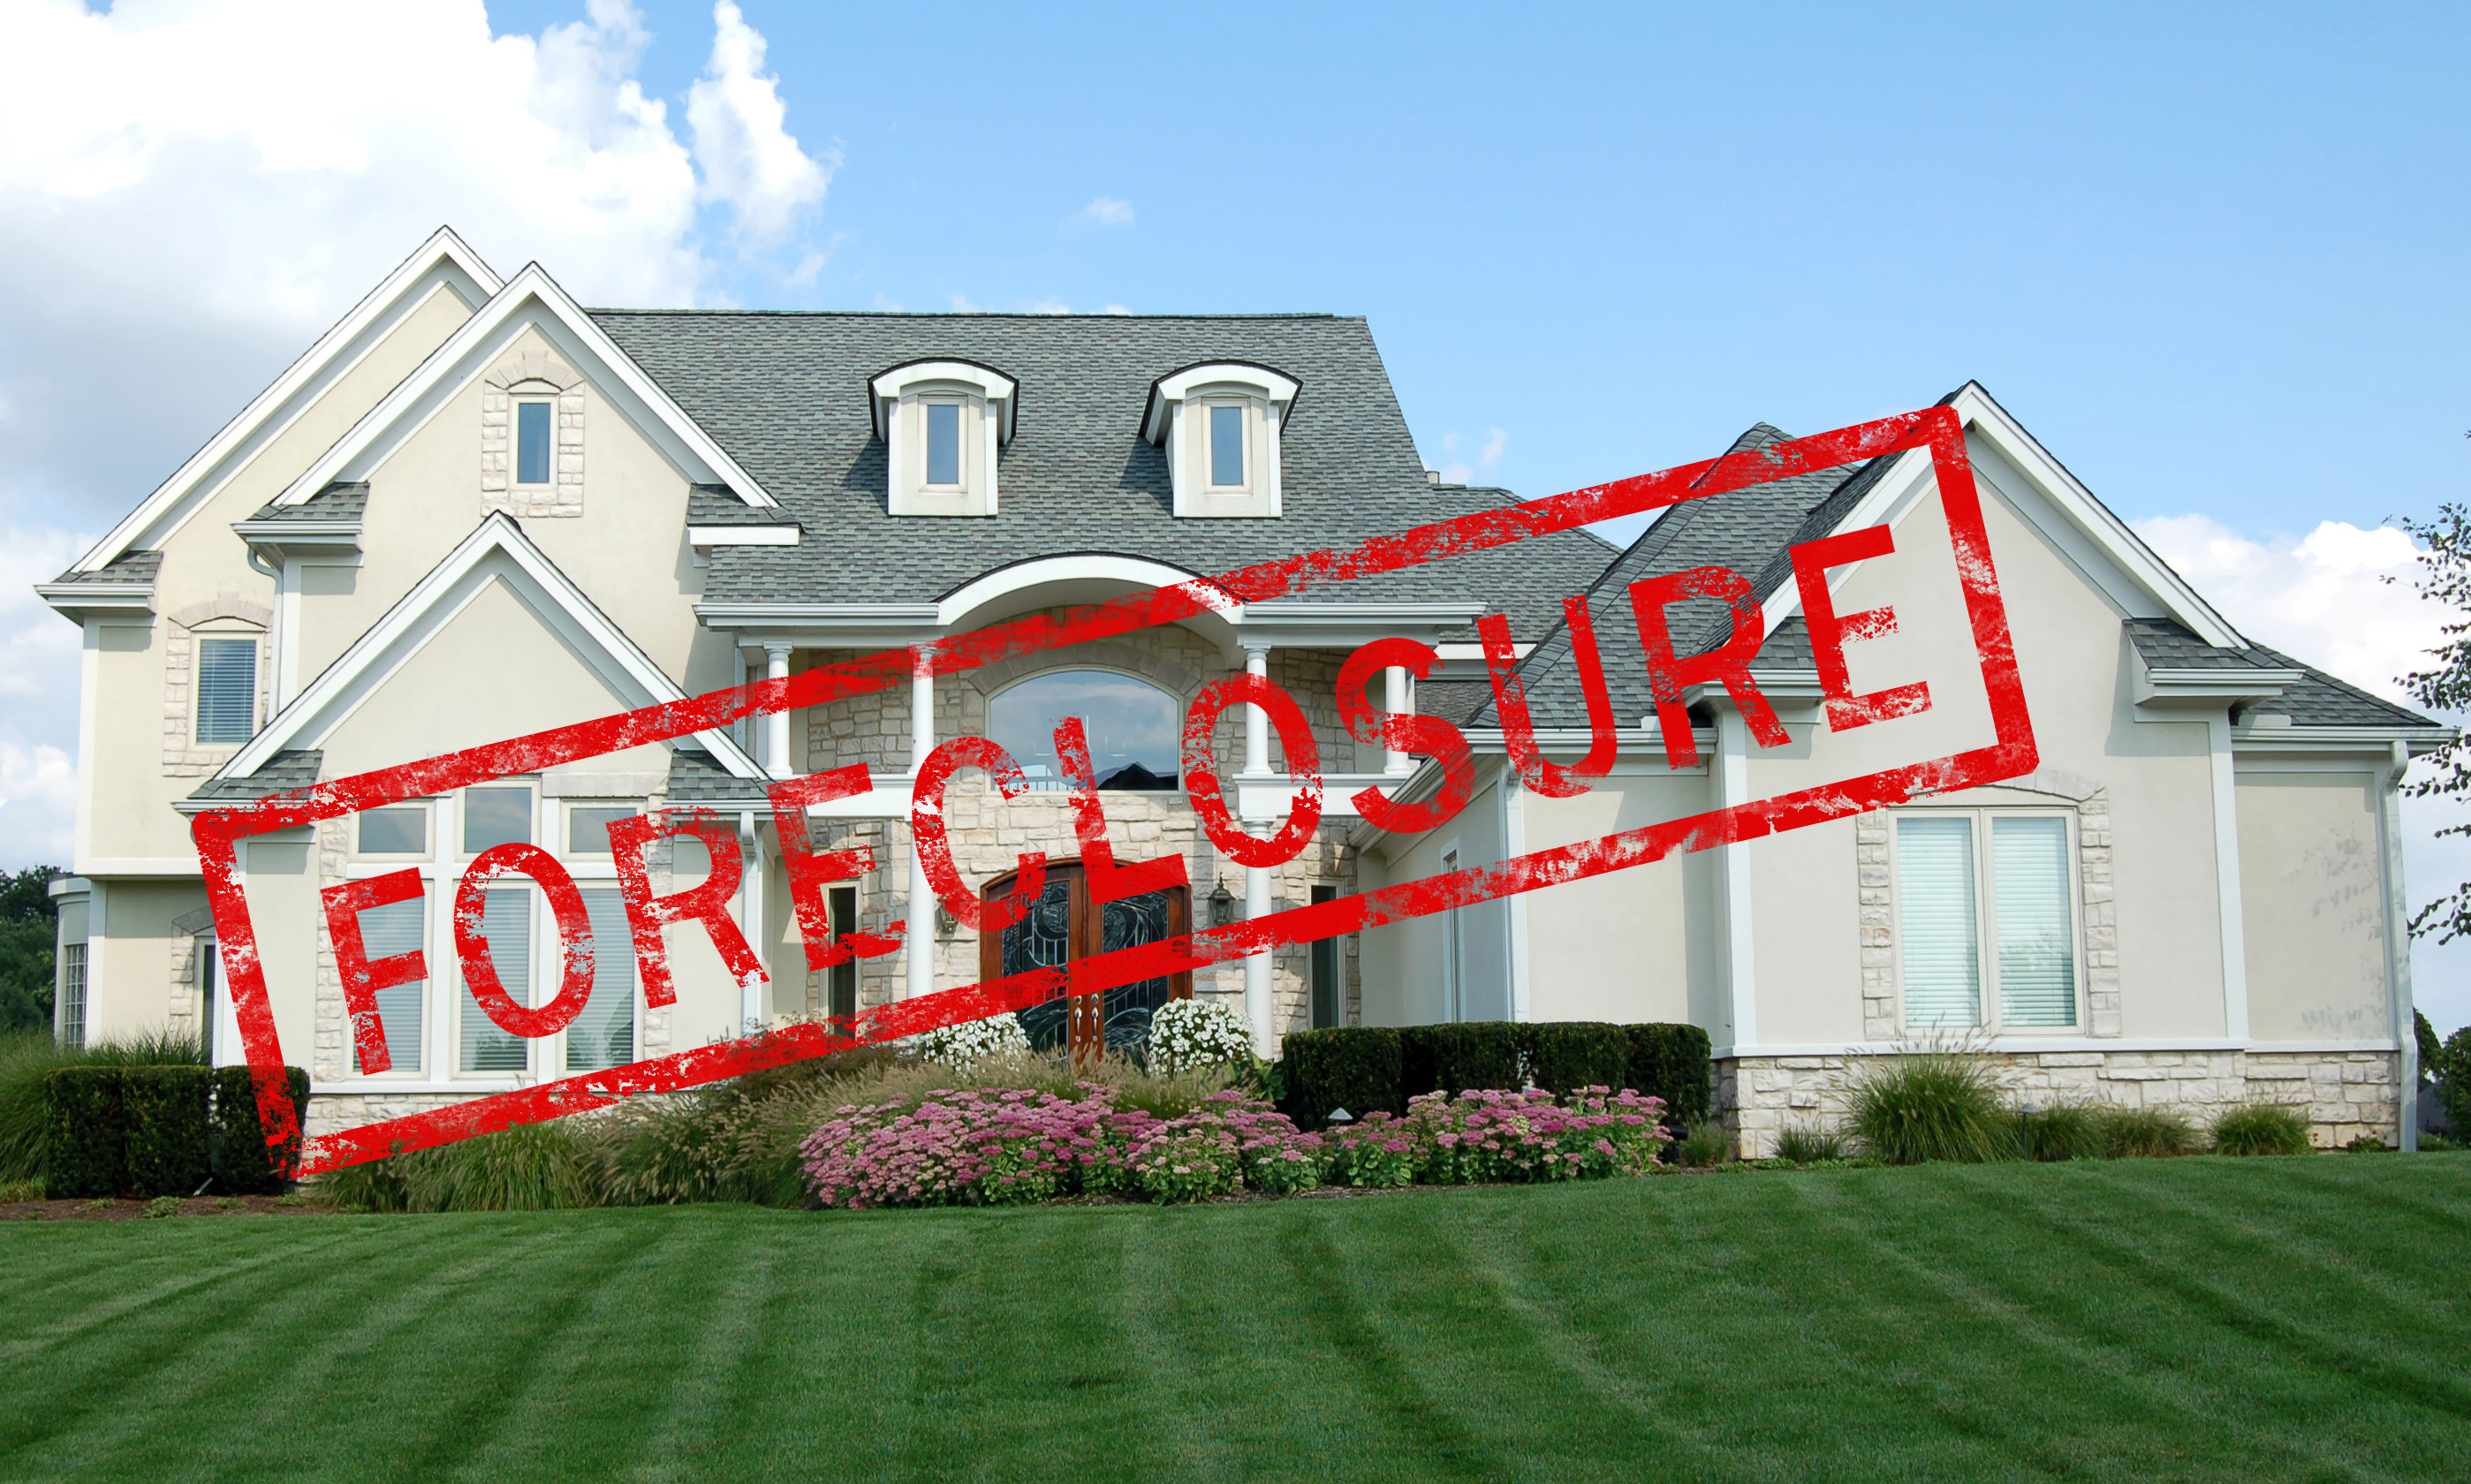 Call Appraisal Services to discuss valuations on Los Angeles foreclosures